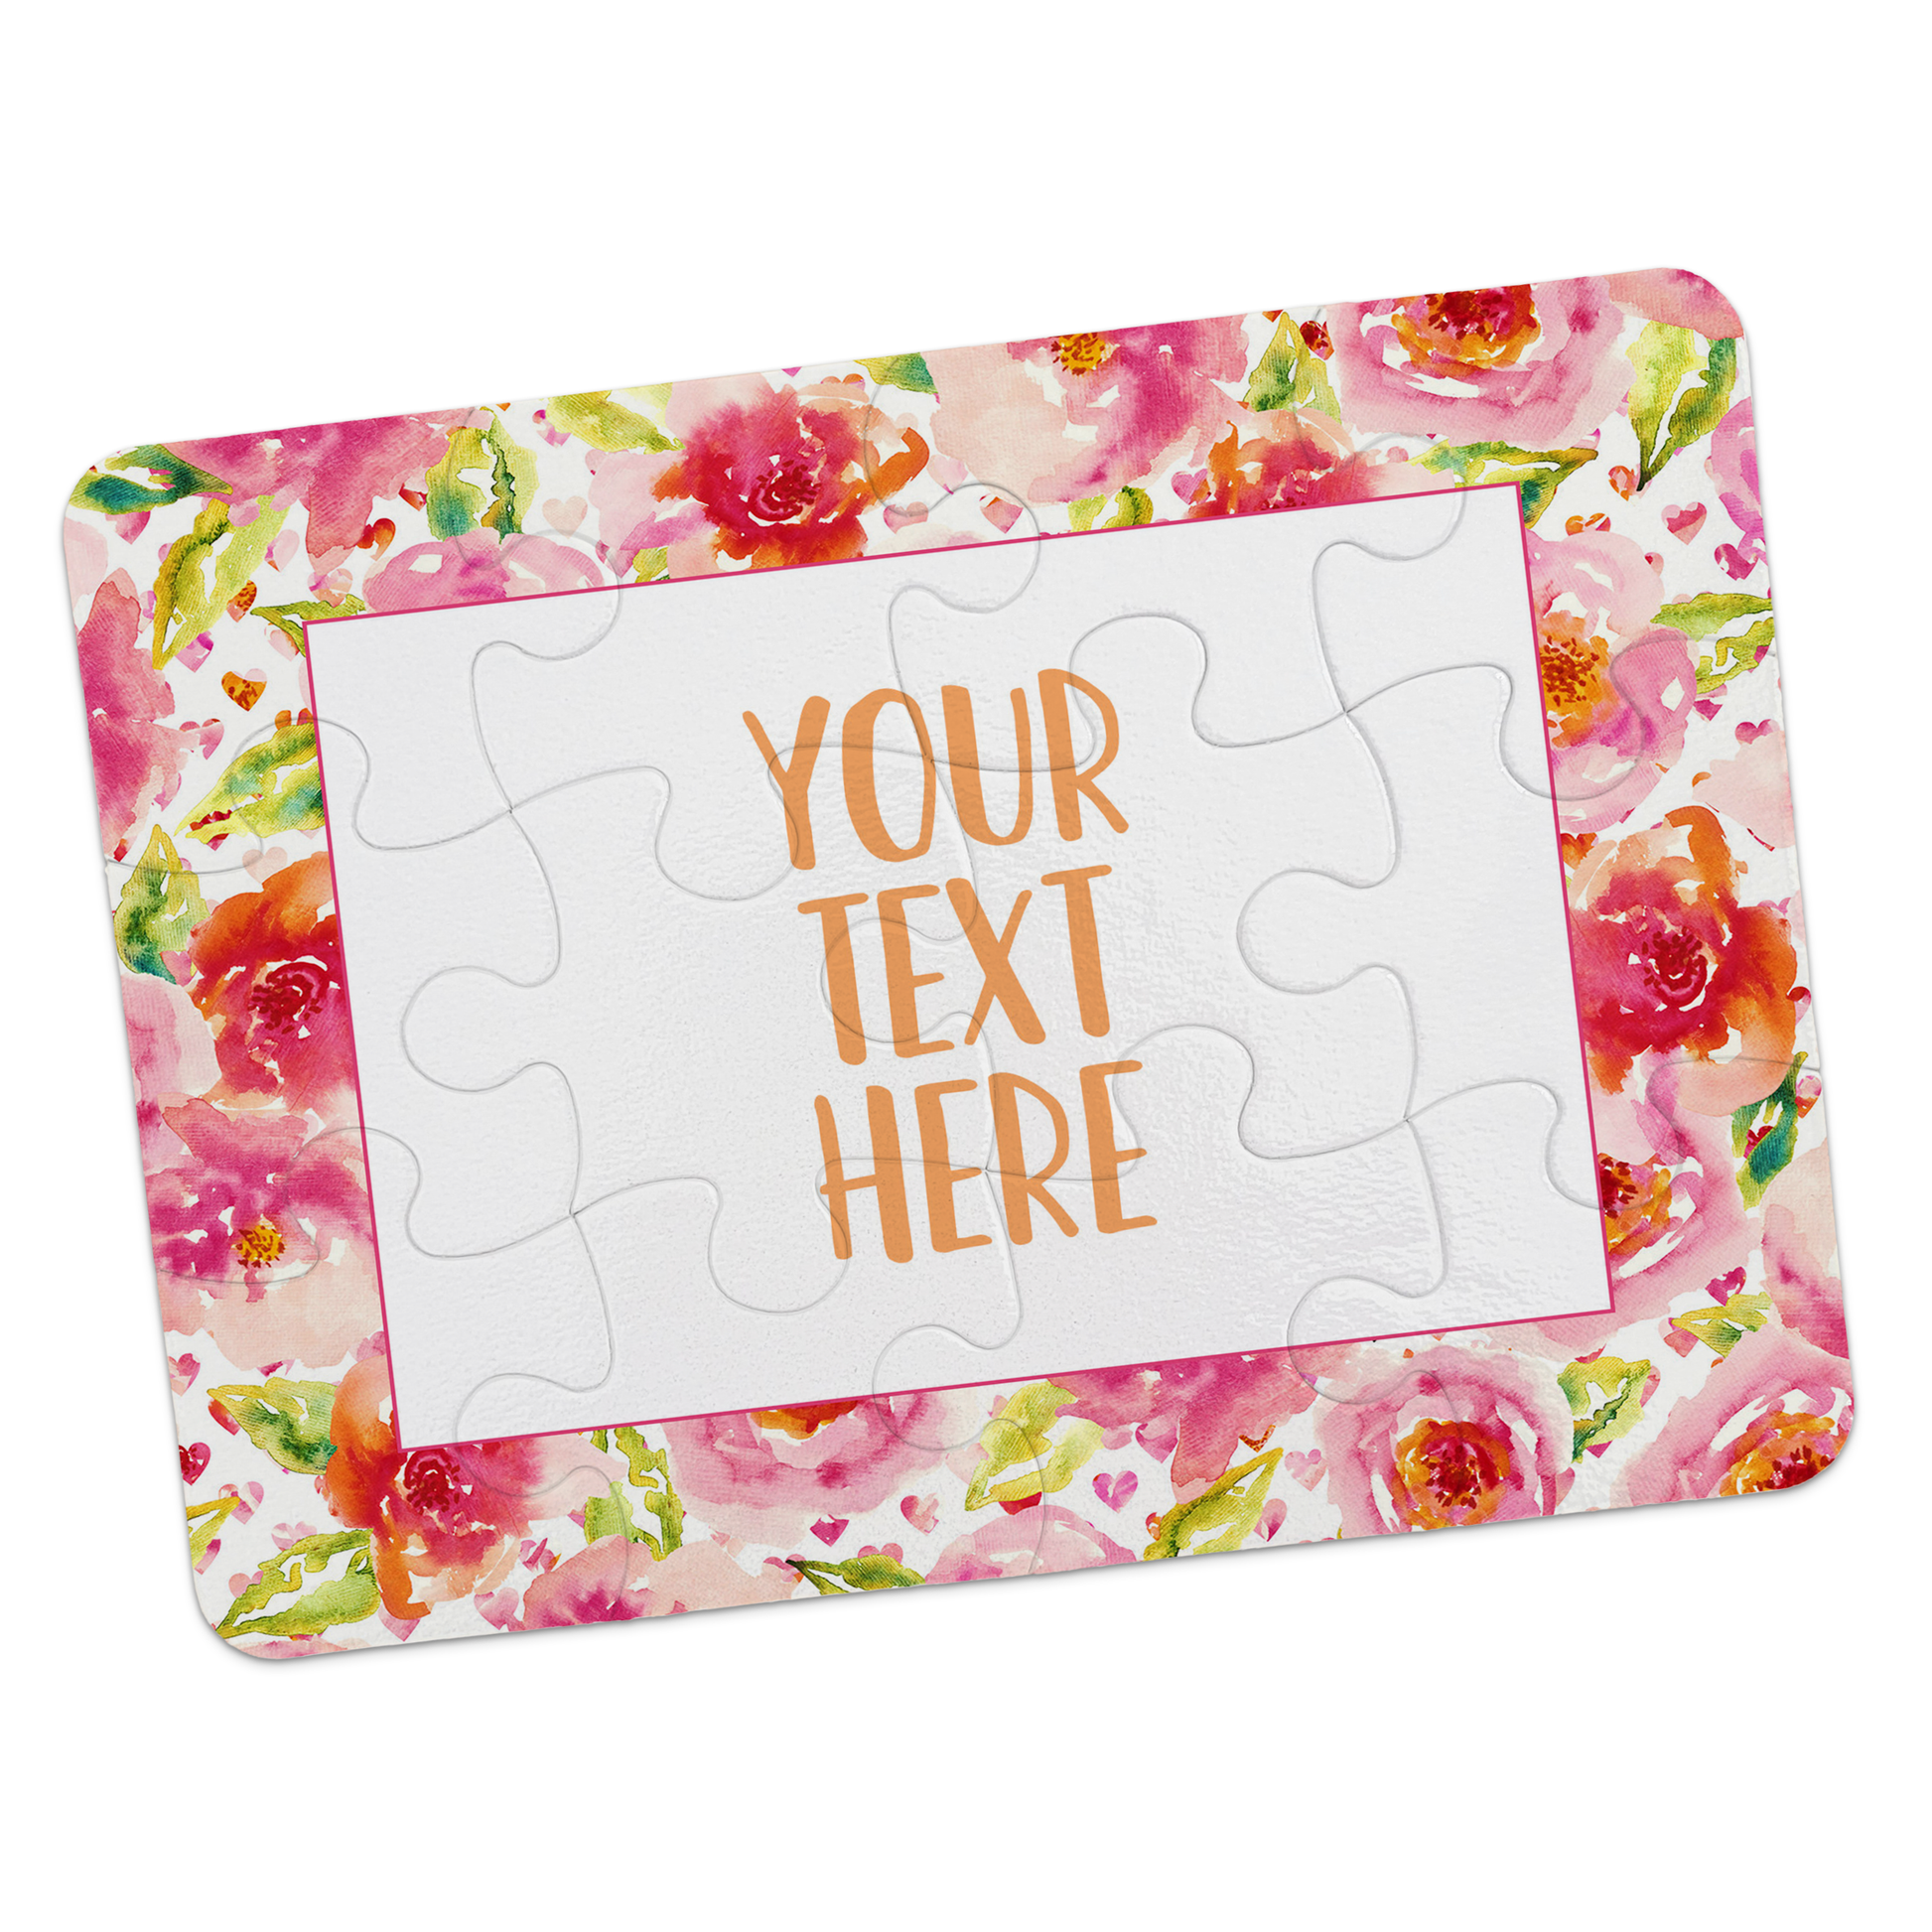 Create Your Own Puzzle - Floral Design - CYOP0049